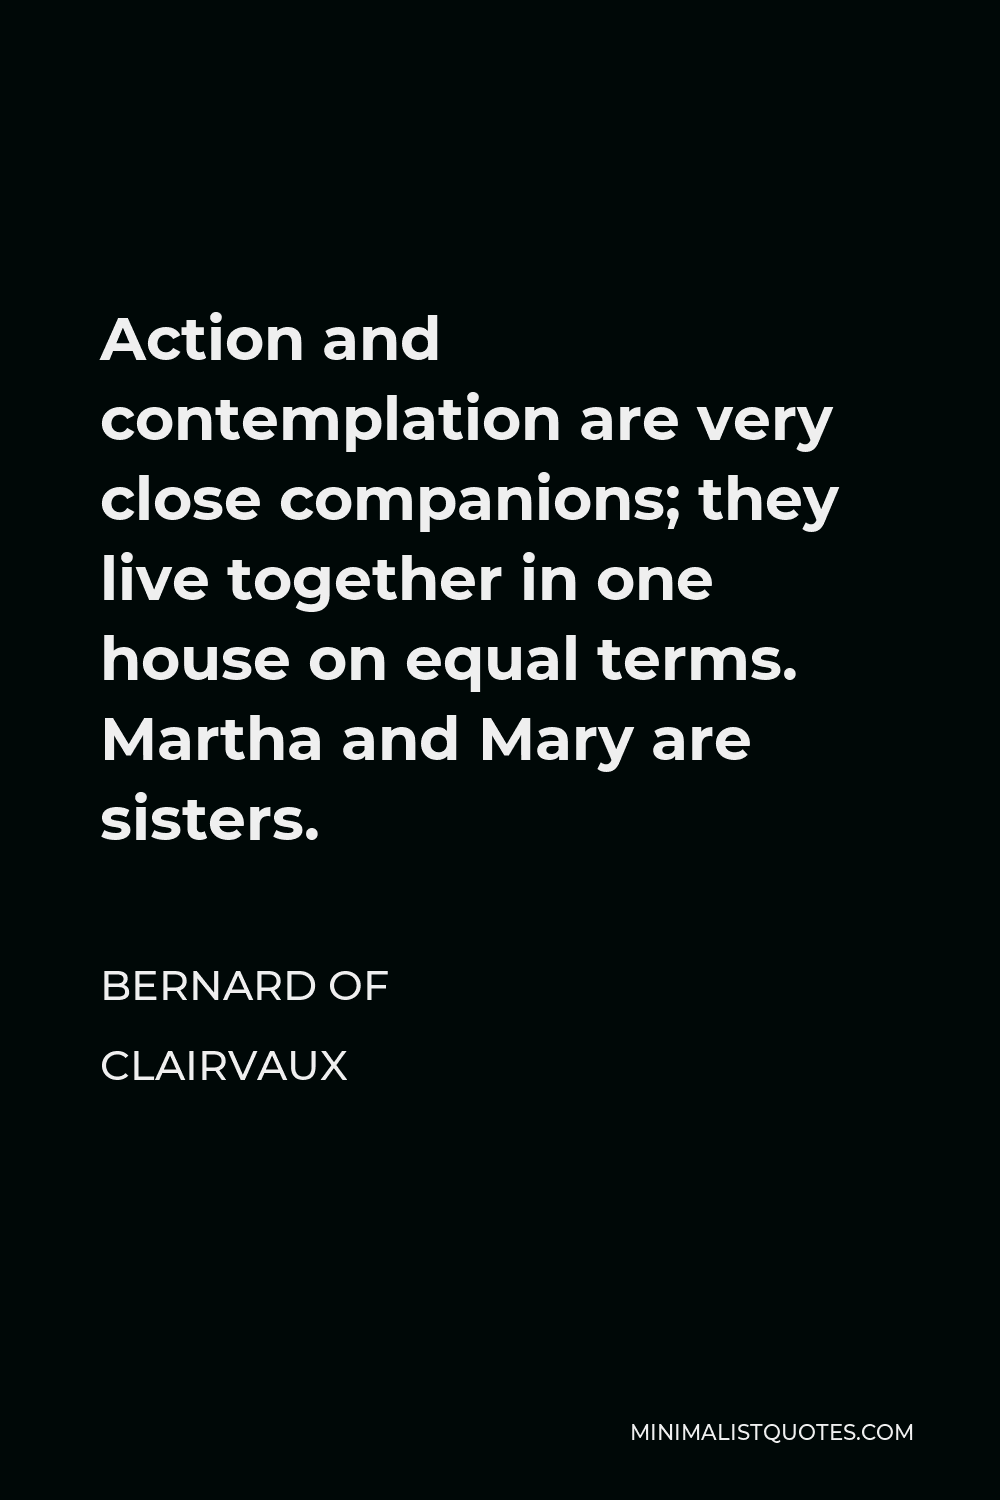 Bernard of Clairvaux Quote - Action and contemplation are very close companions; they live together in one house on equal terms. Martha and Mary are sisters.